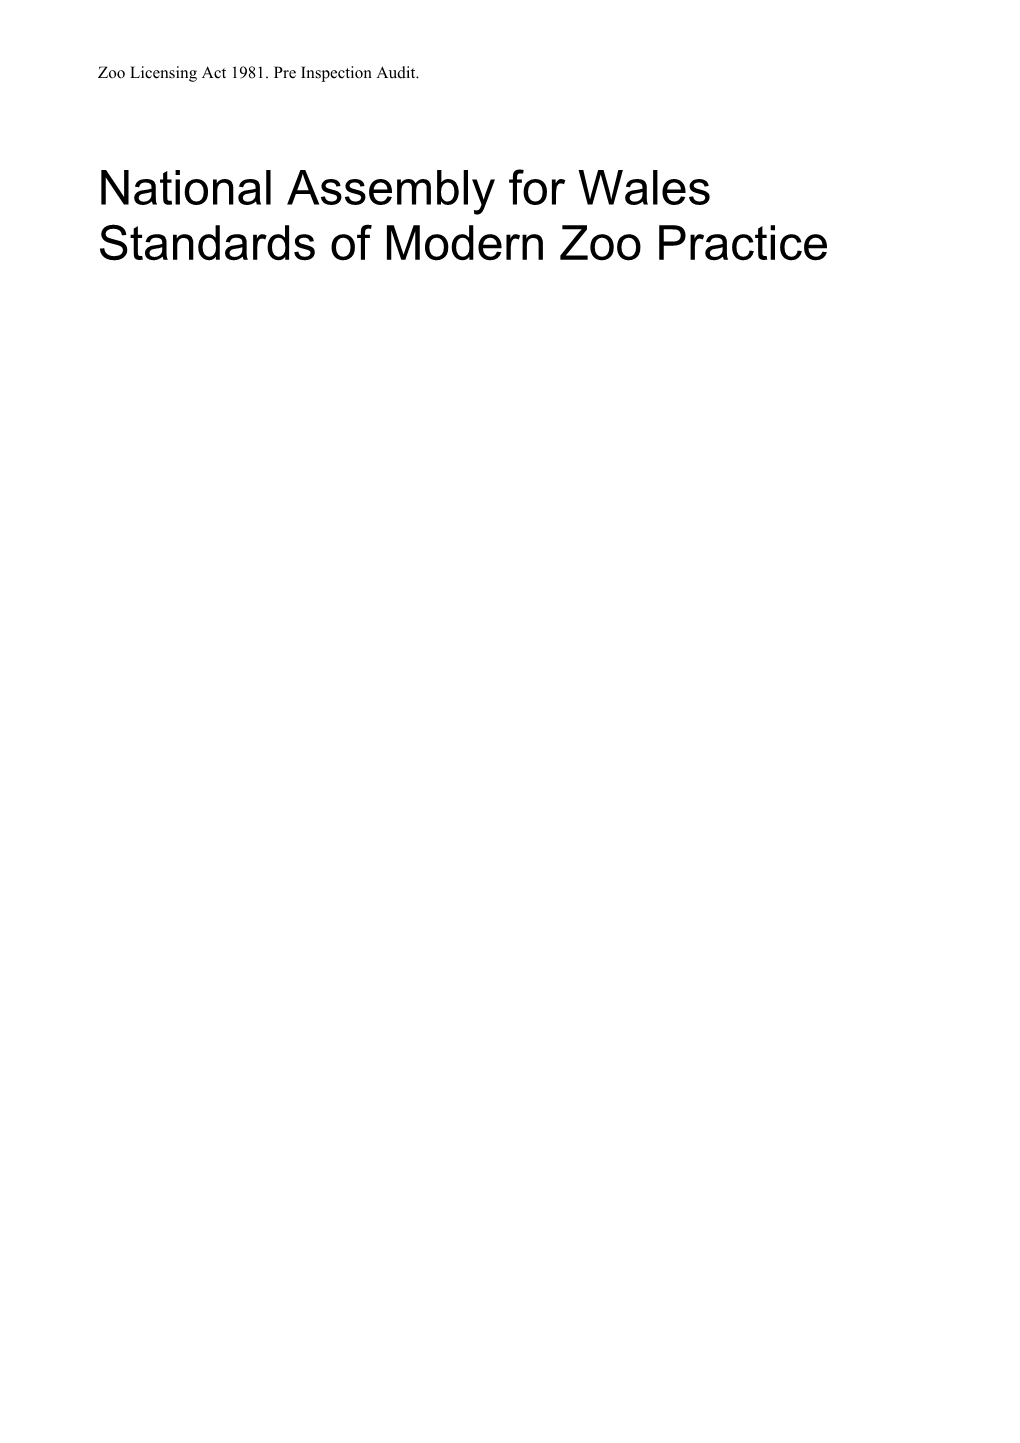 National Assembly for Wales Standards of Modern Zoo Practice